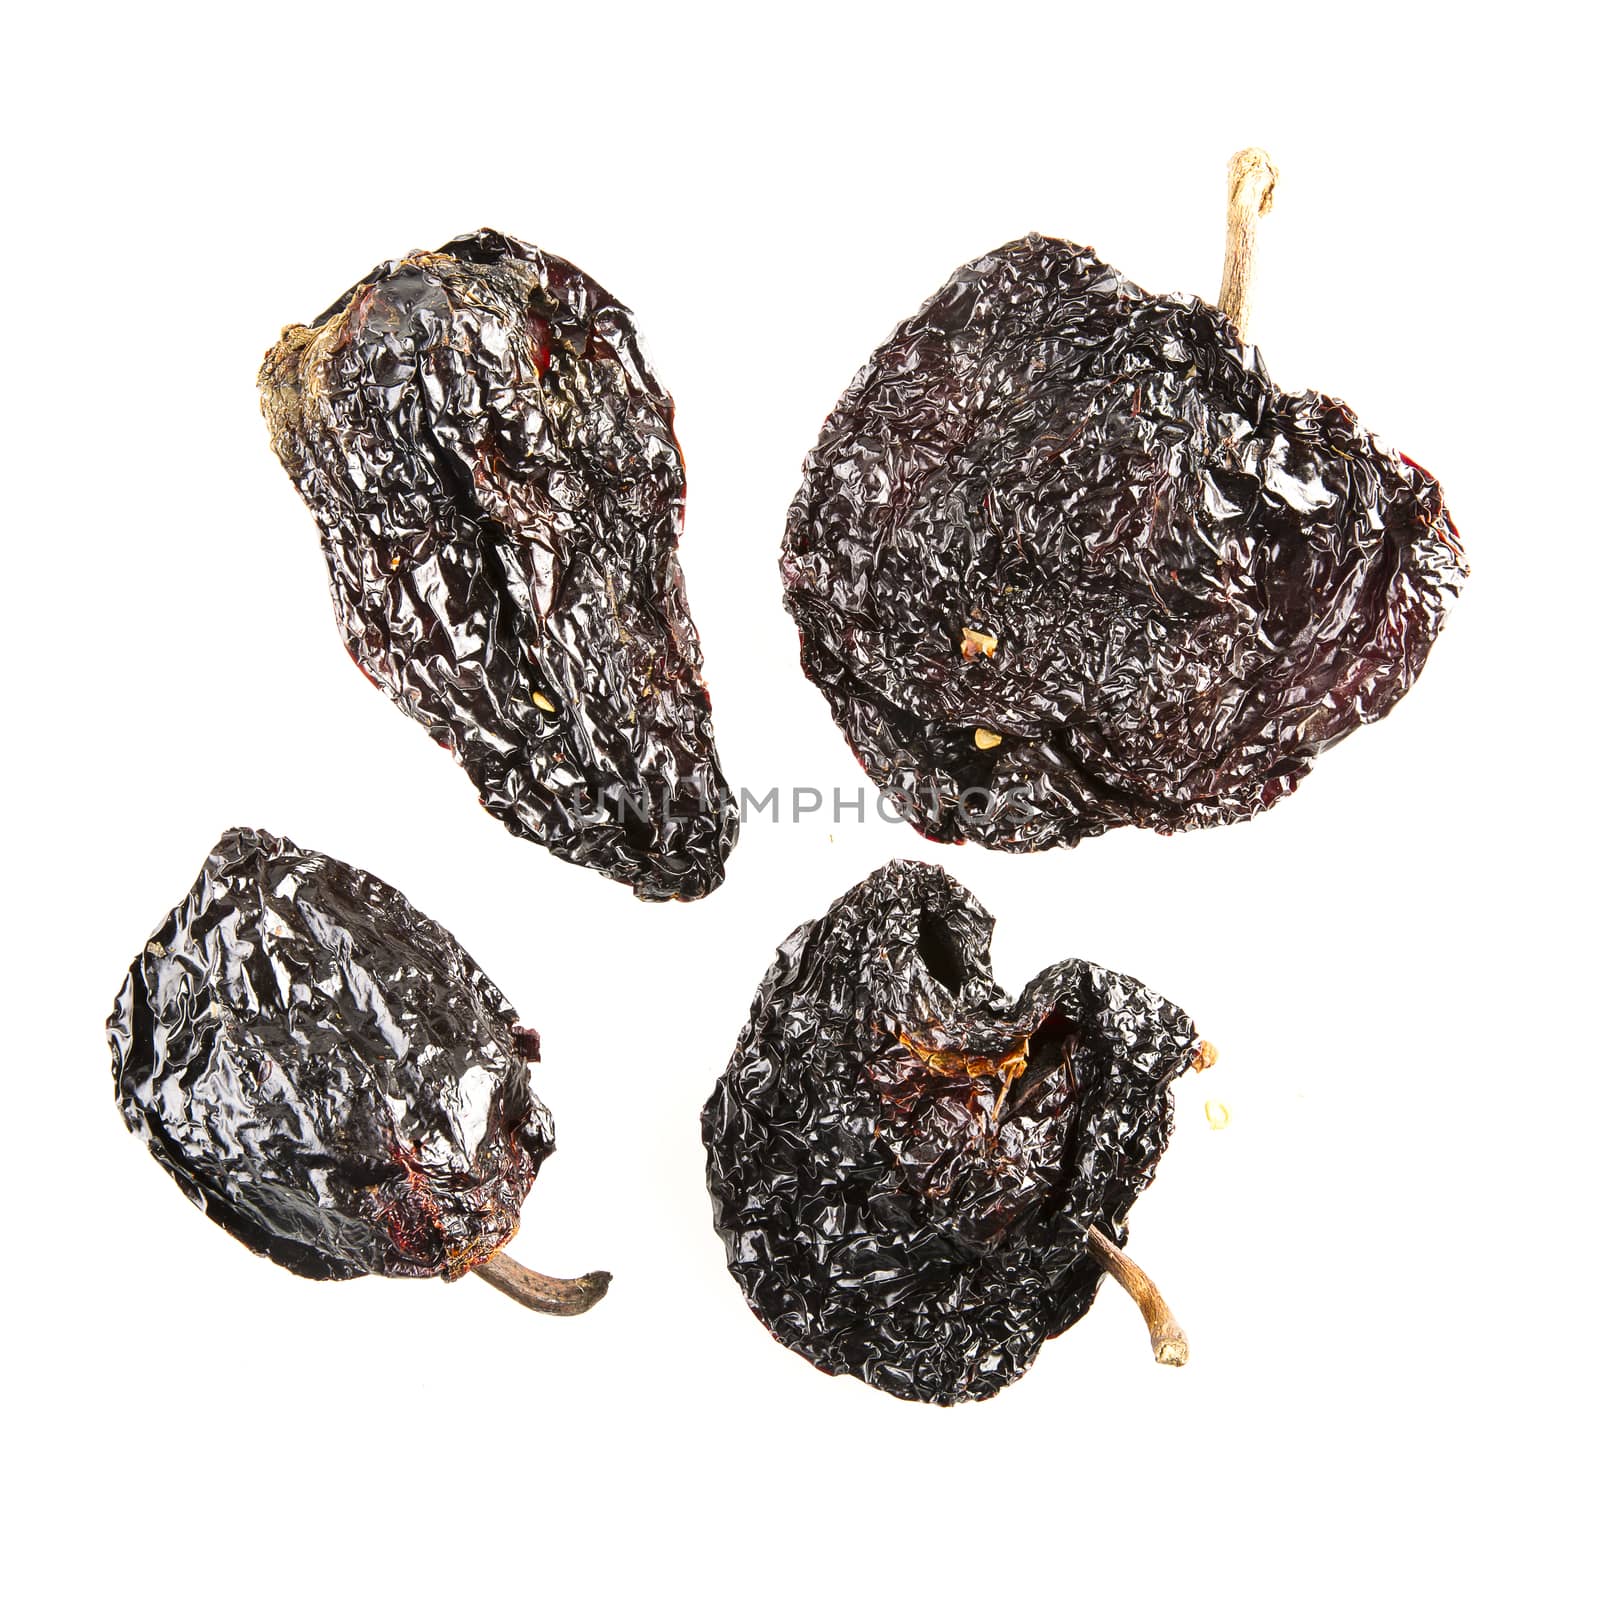 Four dried poblano chilies isolated on white.